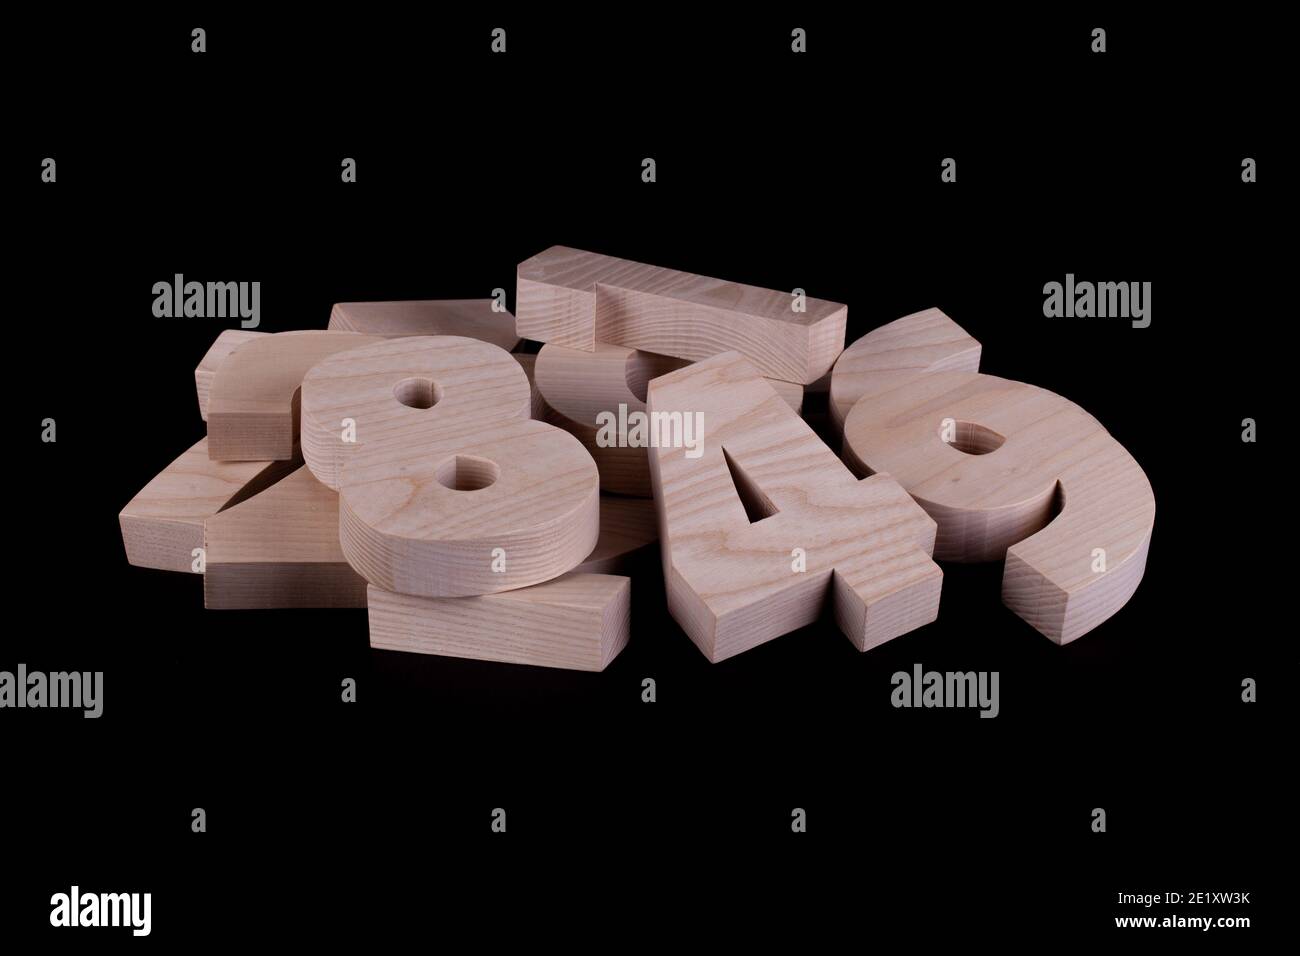 Pile of large random wooden numbers with a black background. Hardwood cutout shapes Stock Photo